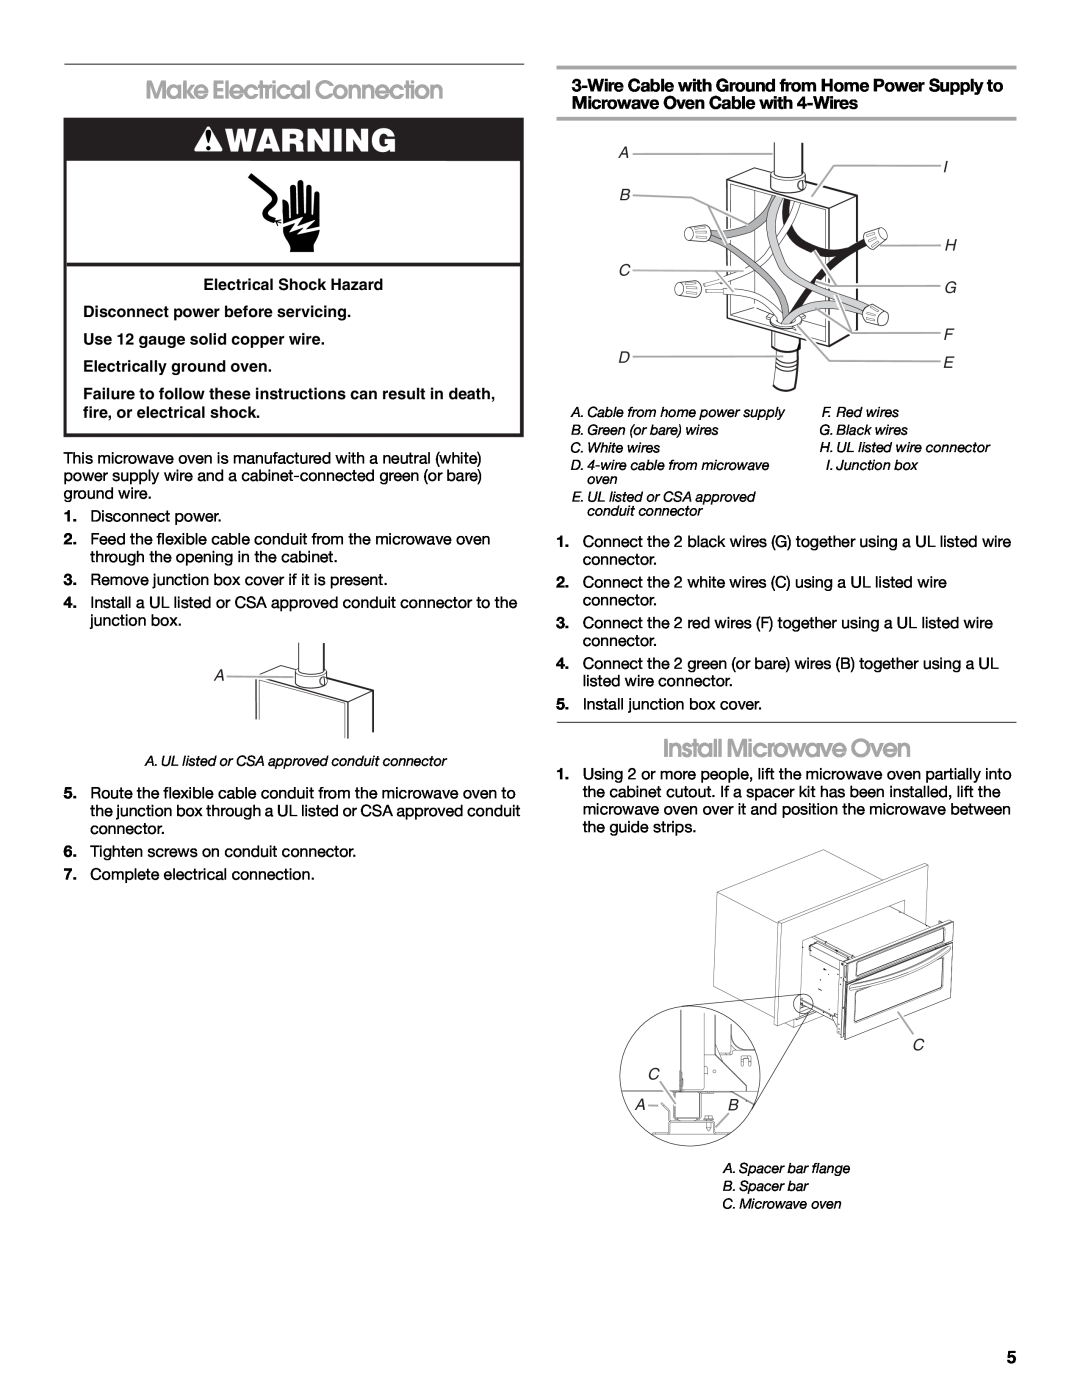 KitchenAid W10351317A installation instructions Make Electrical Connection, Install Microwave Oven, I H G F E, C C A B 